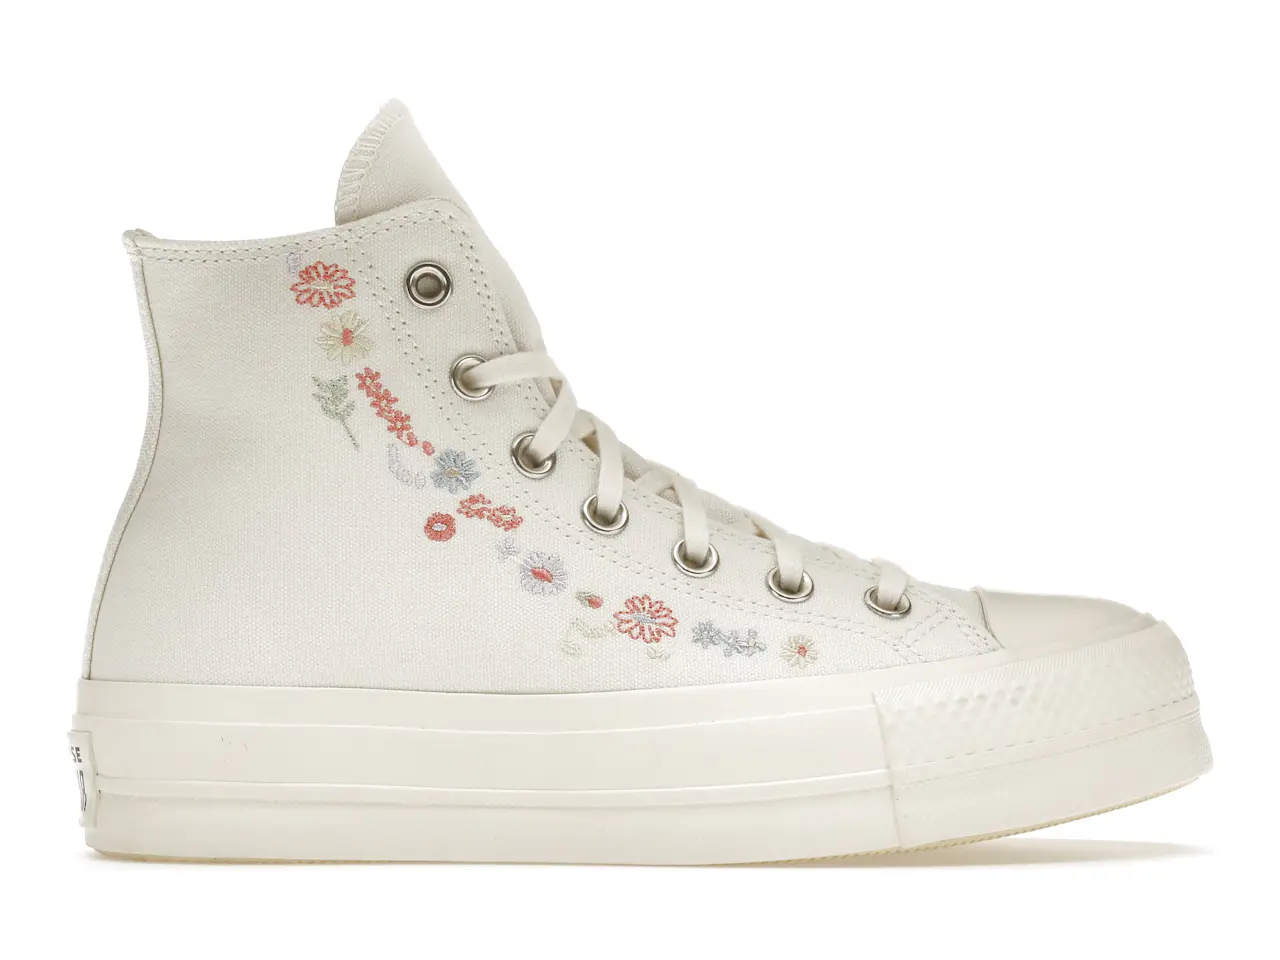 Converse Chuck Taylor All Star Lift Hi Things To Grow Egret - A01586C - US